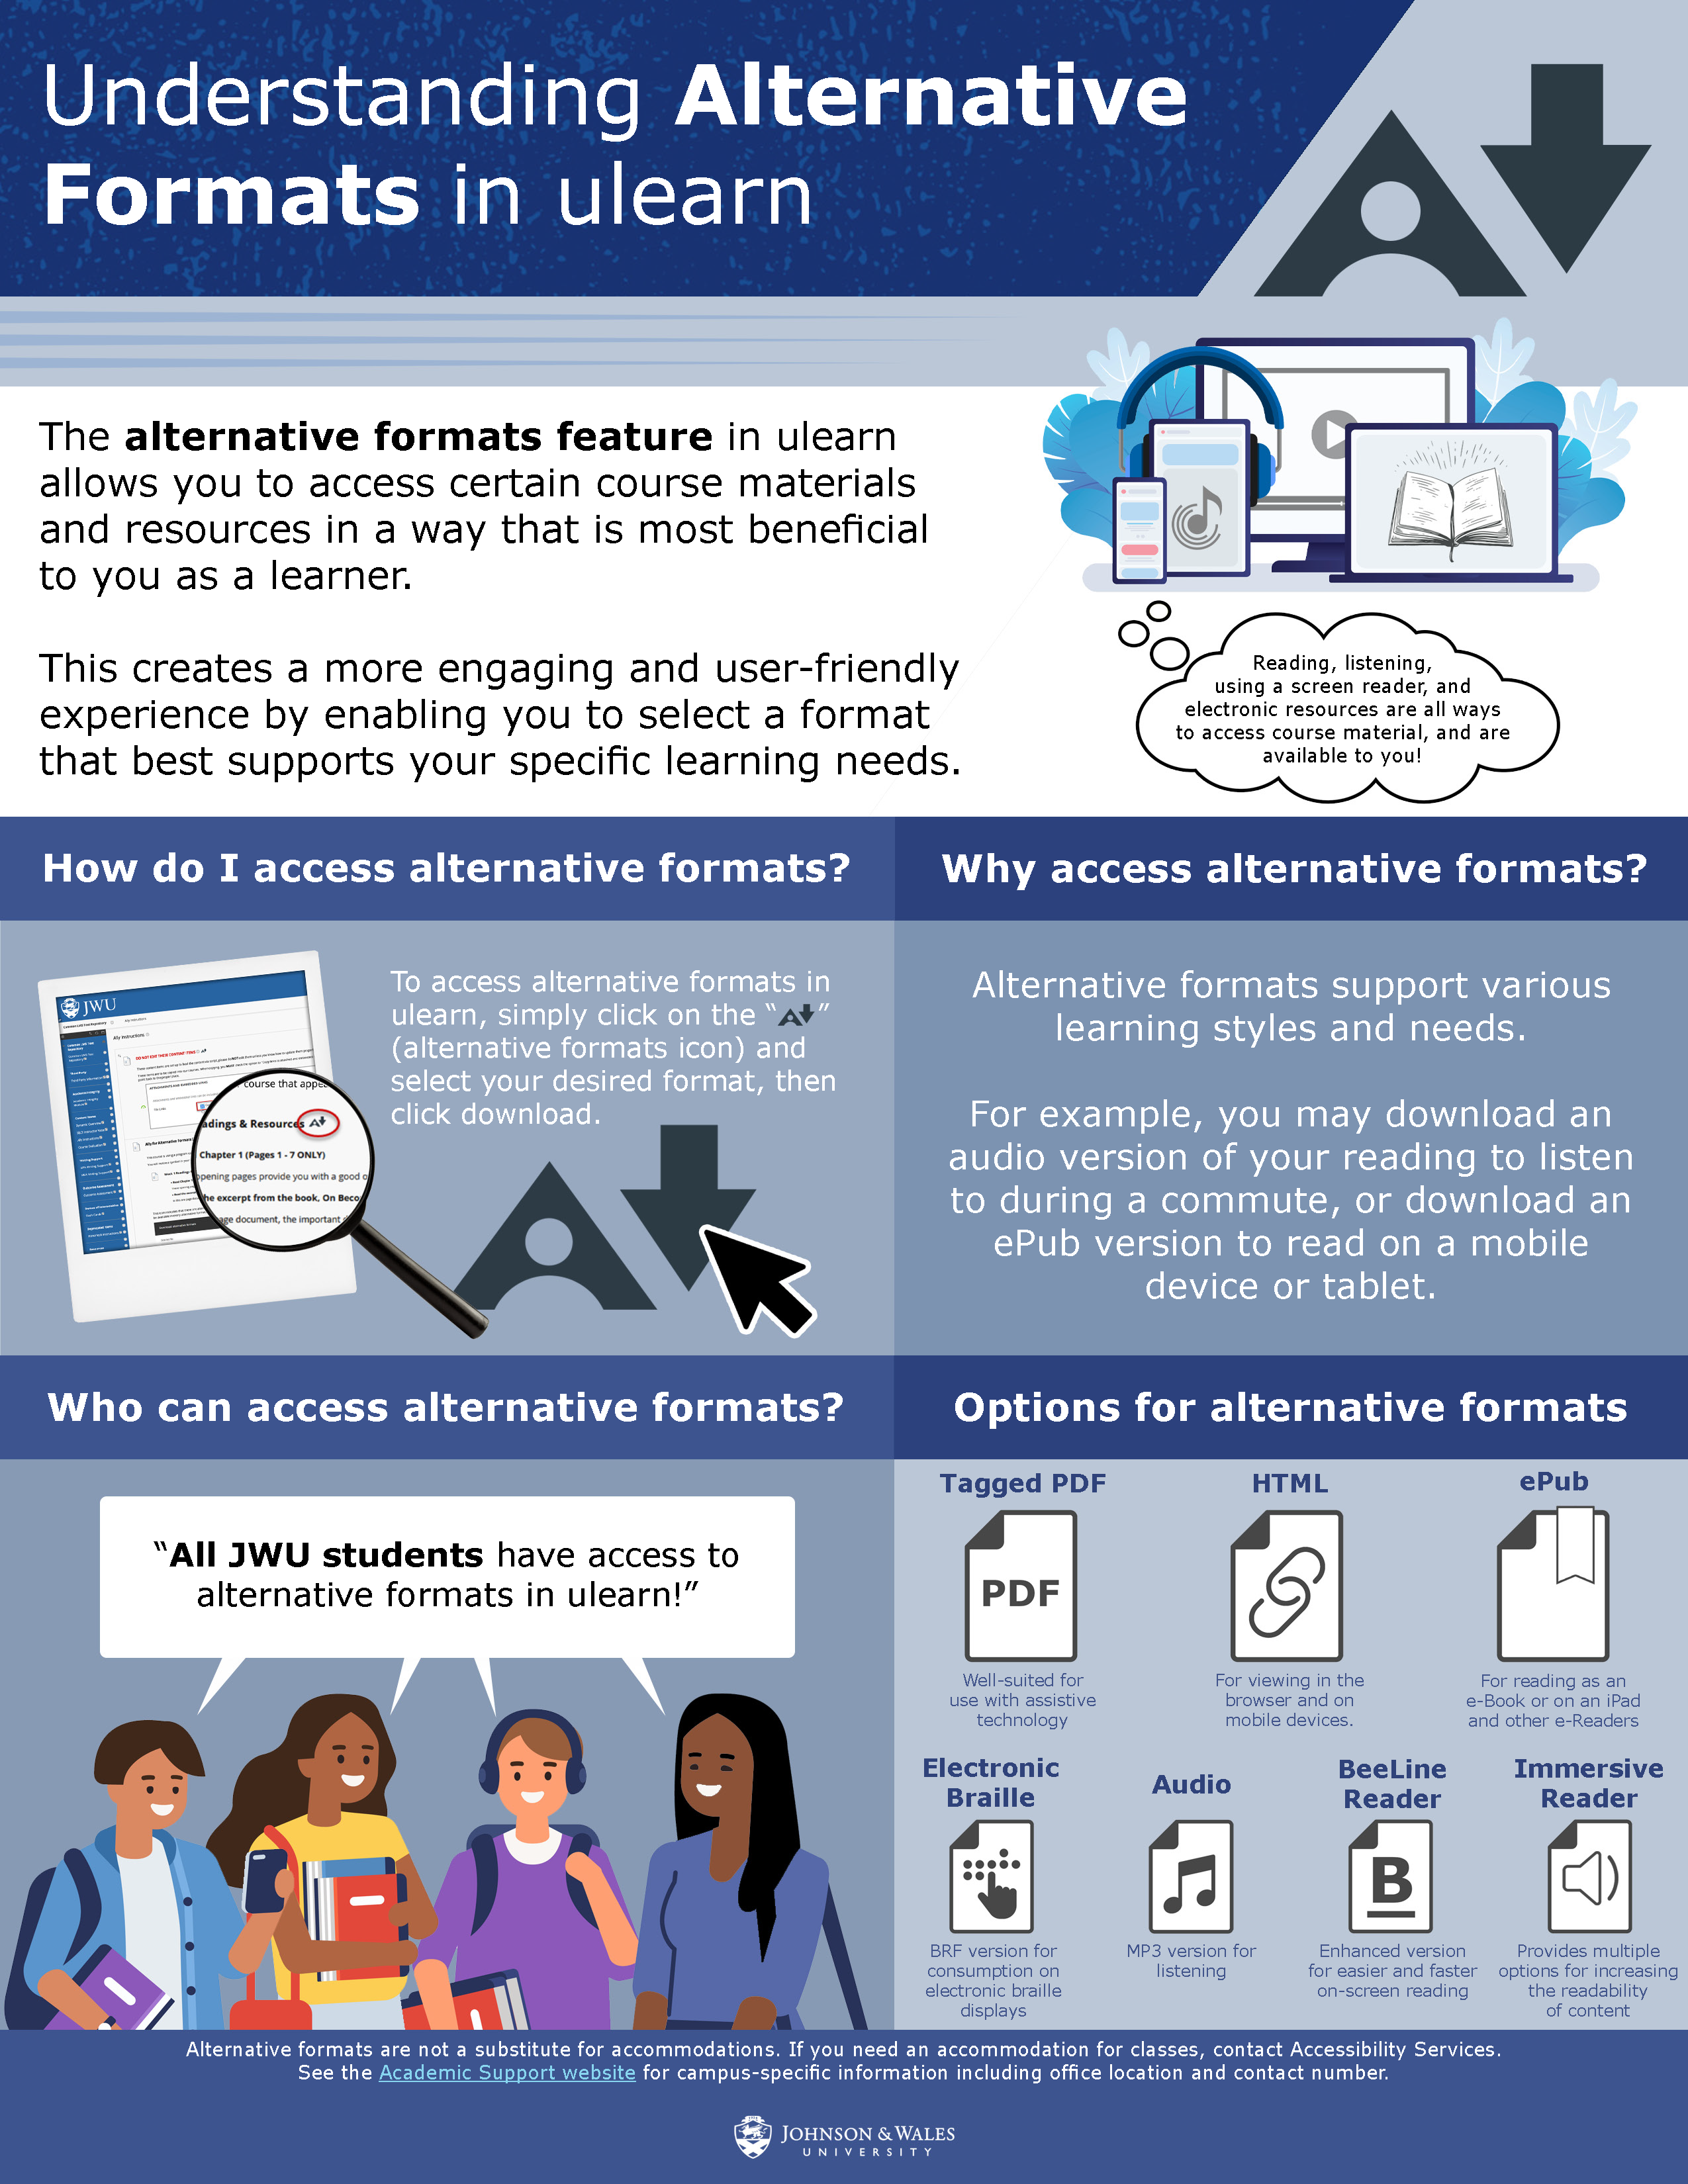 infographic about the 5 alternative formats available in ulearn including tagged PDF, HTML, ePub, Electronic Braille, Audio, BeeLine Reader, Immersive Reader